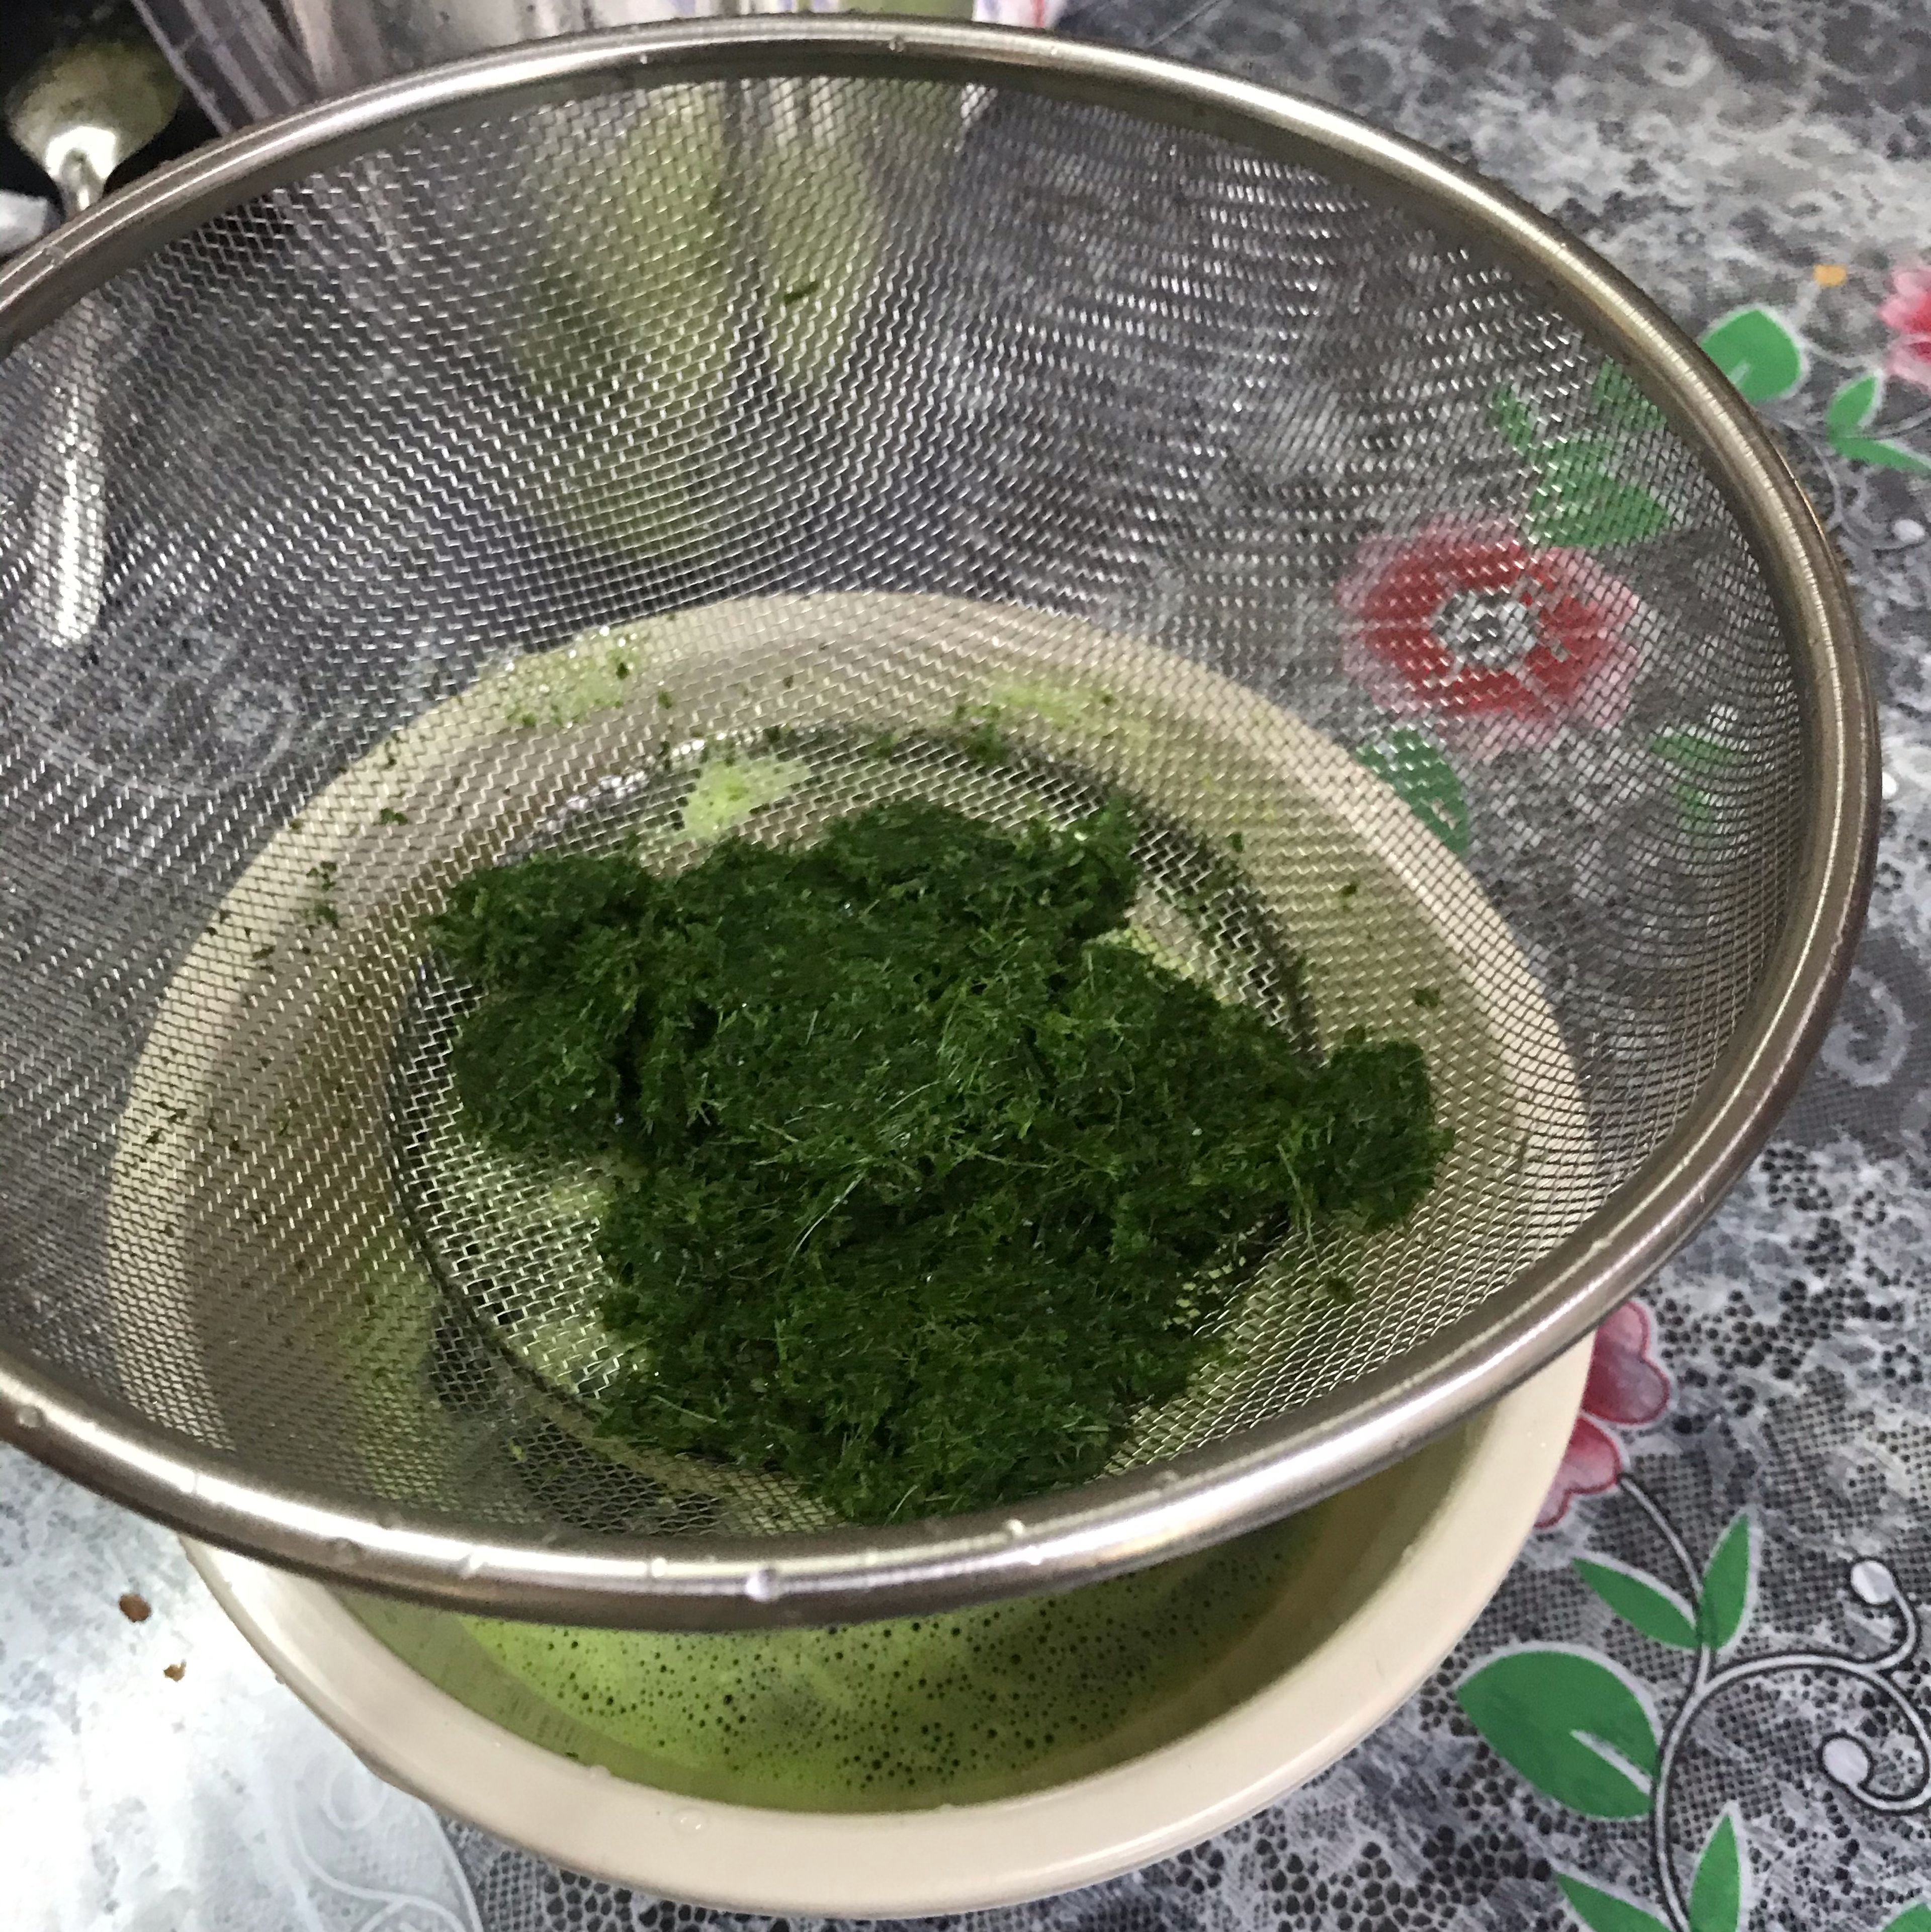 after the pandan leaves got blended, filter it into a bowl. press the pandan leaves to get the water out of it